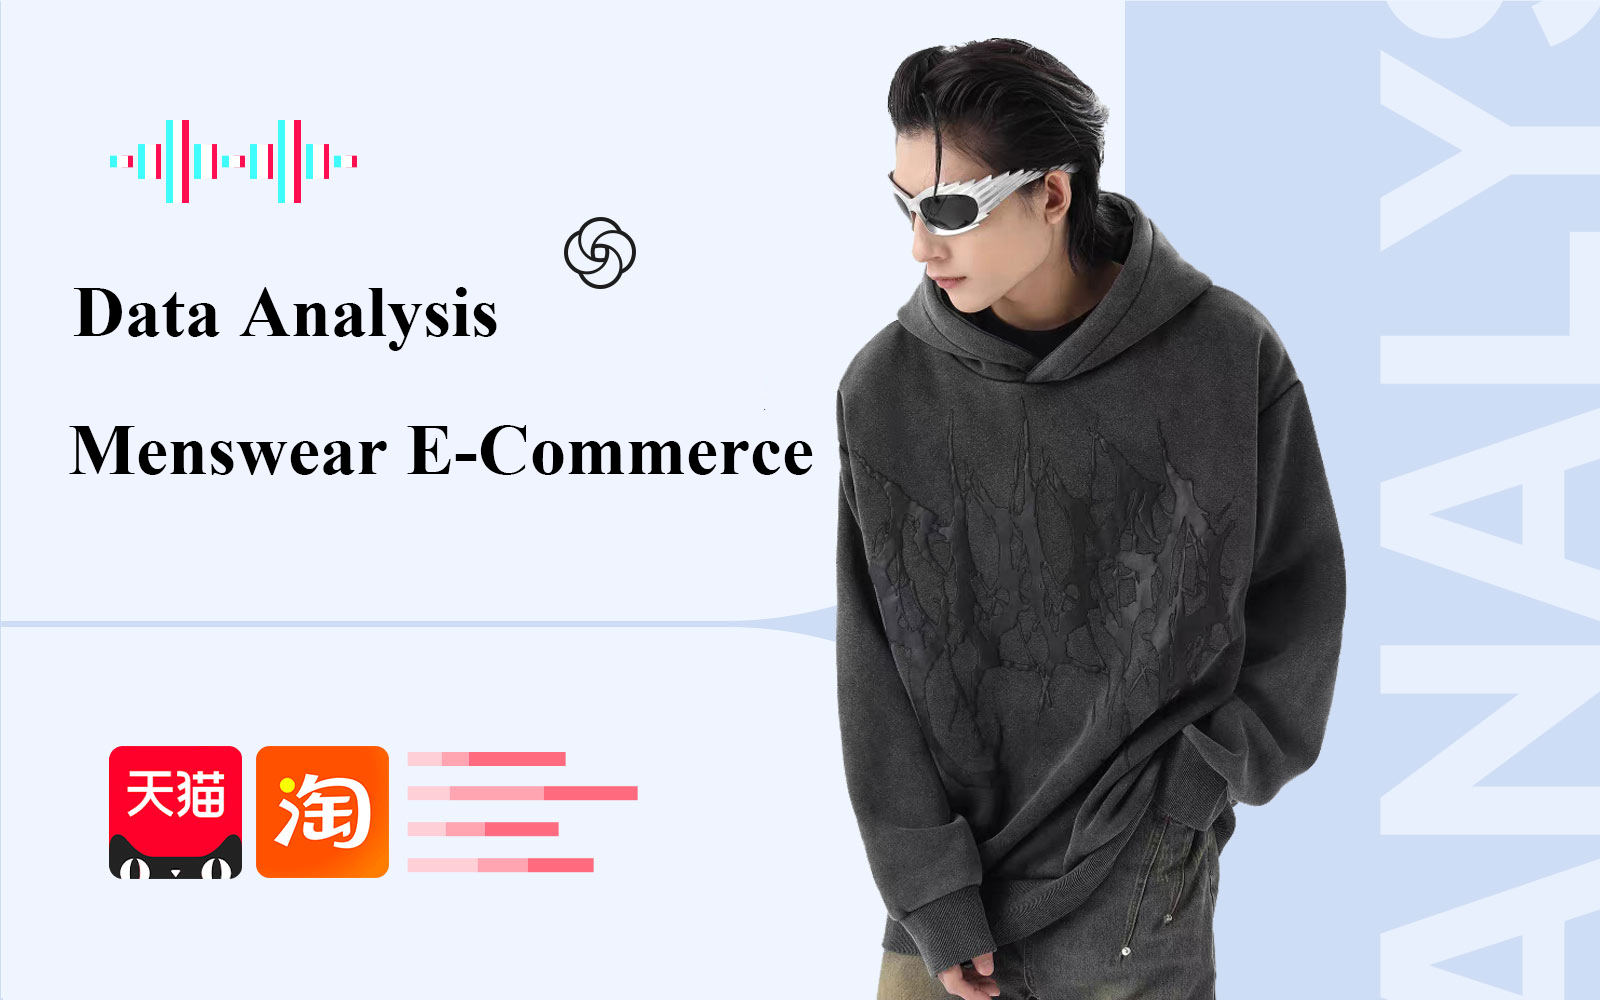 The Data Analysis of Menswear E-Commerce Products